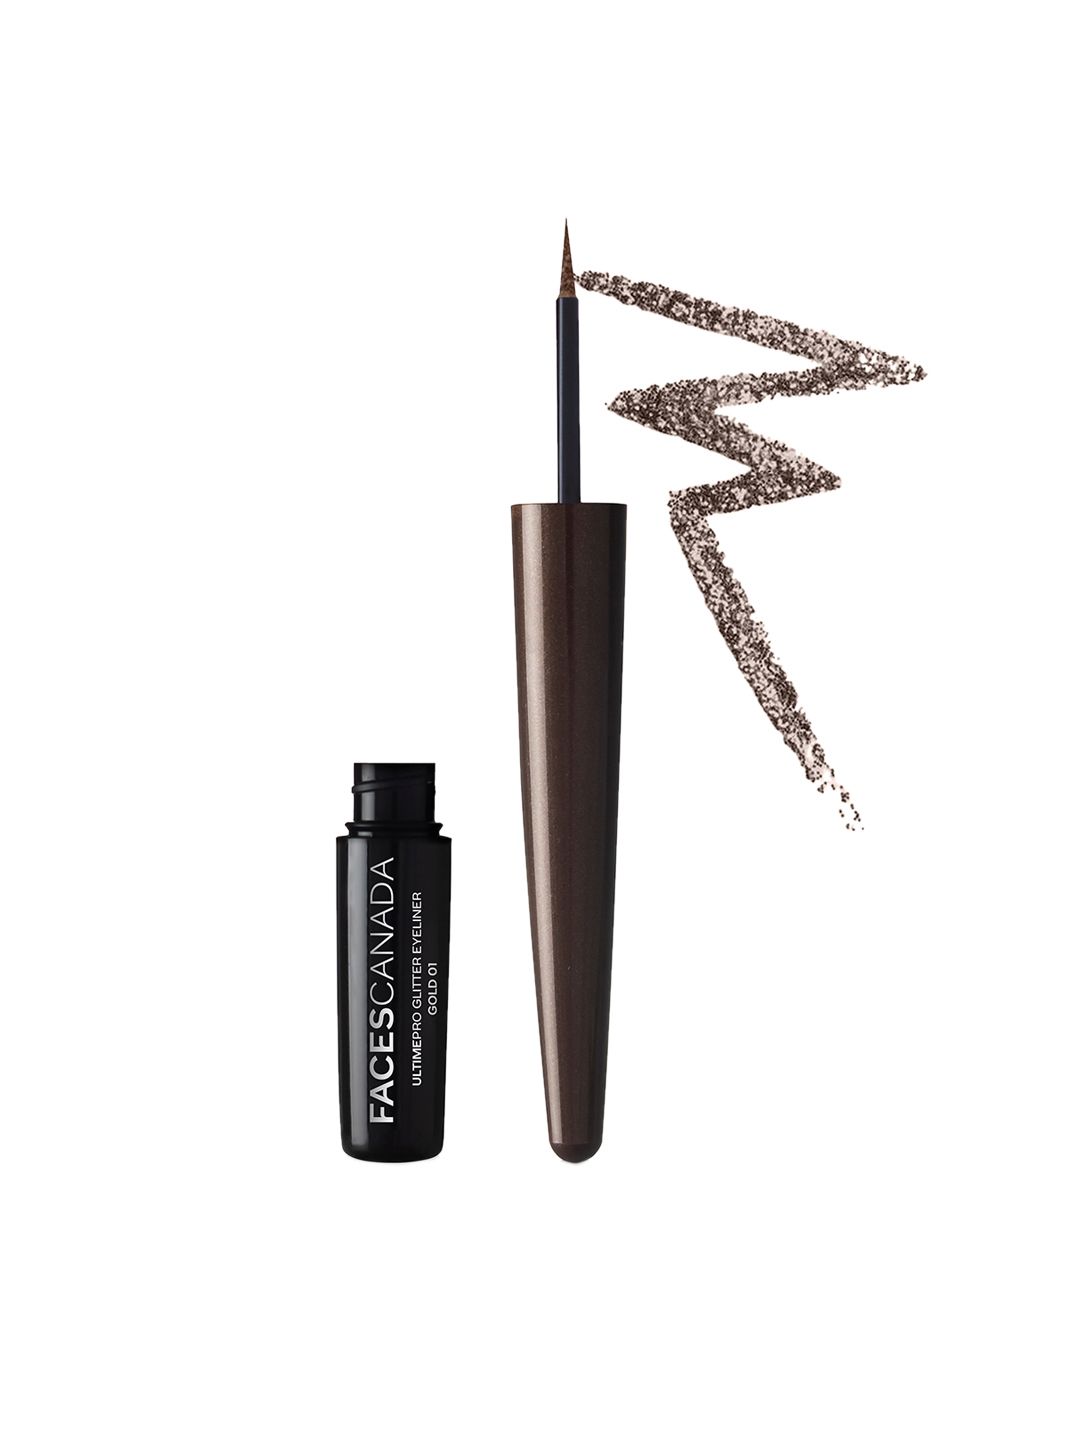 FACES CANADA Ultime Pro Glitter Eyeliner Copper 02 - 1.7ml Price in India